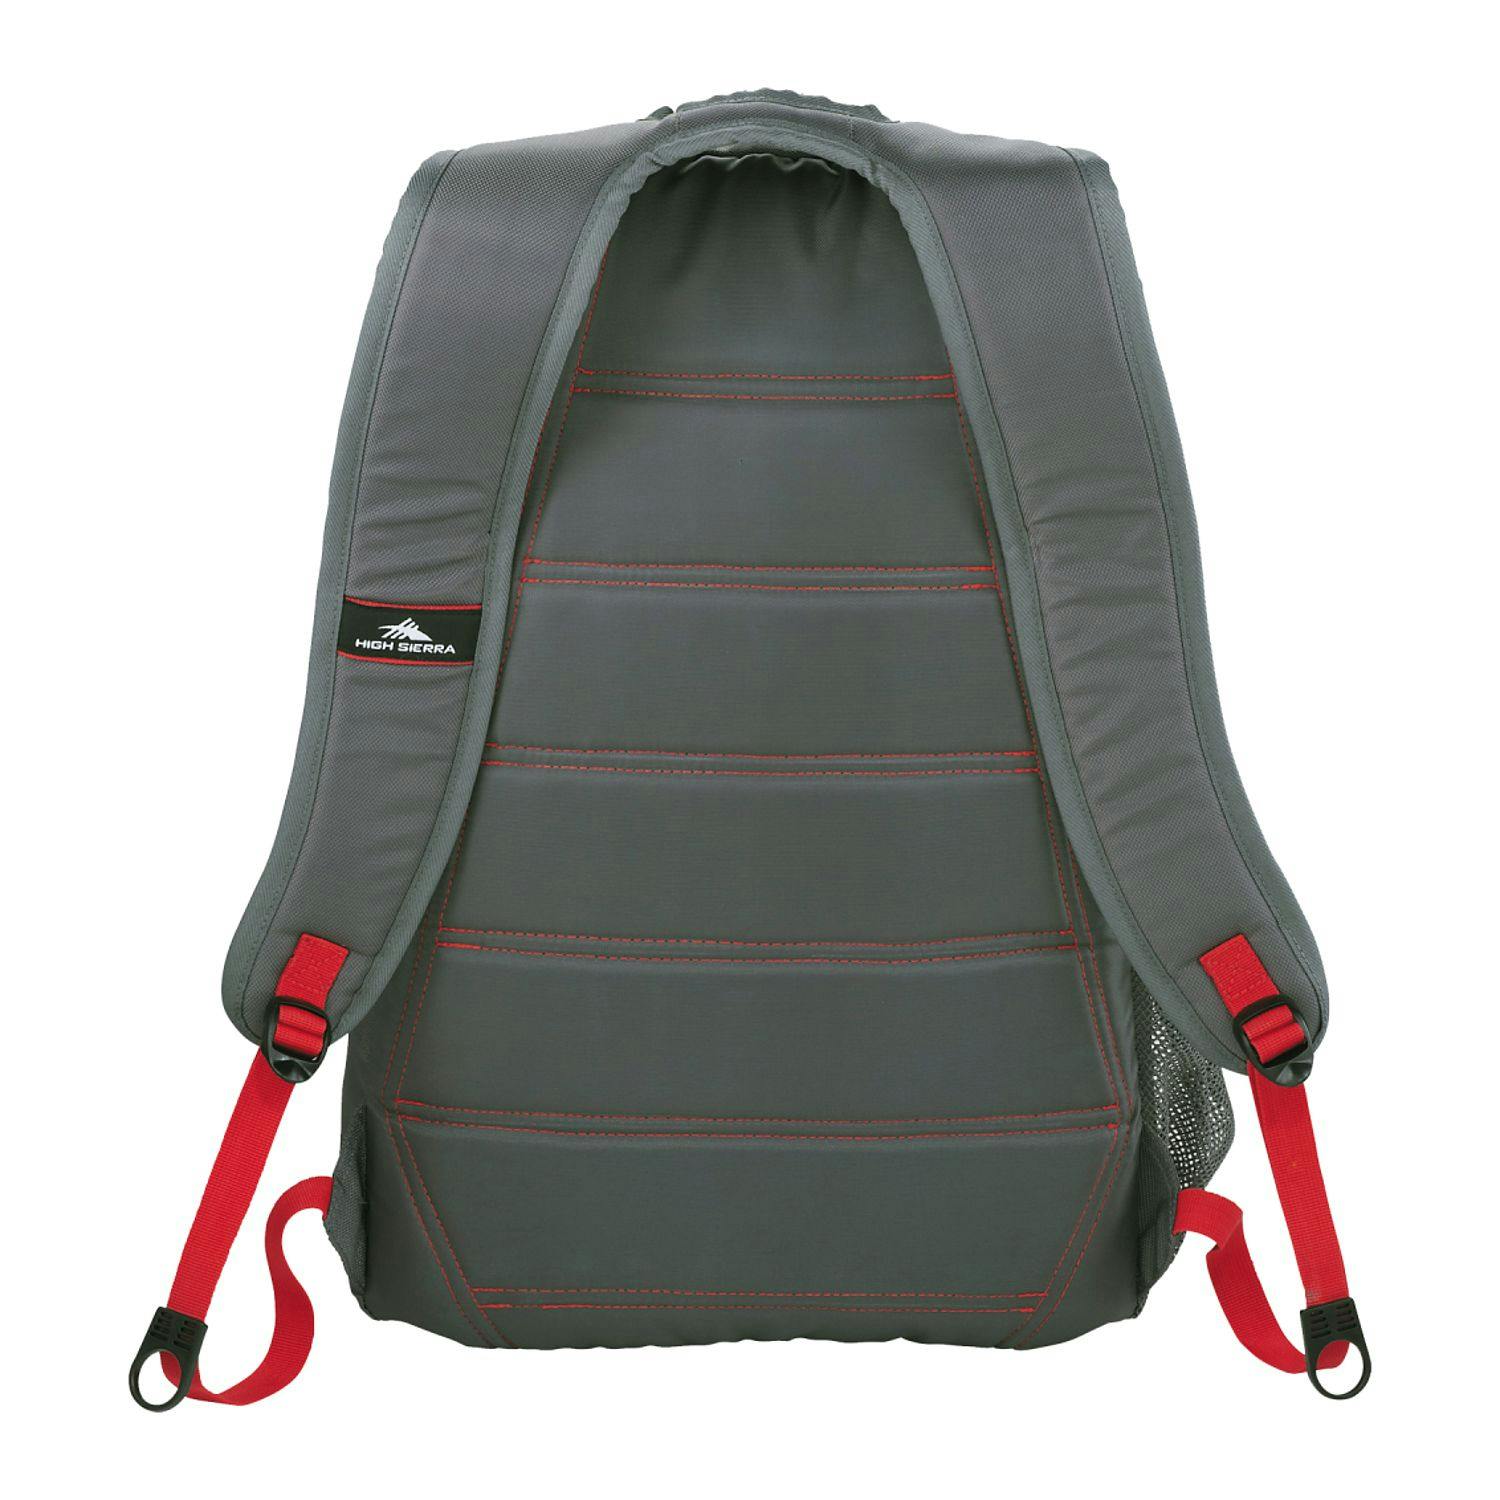 High Sierra Fallout 17" Computer Backpack - additional Image 4